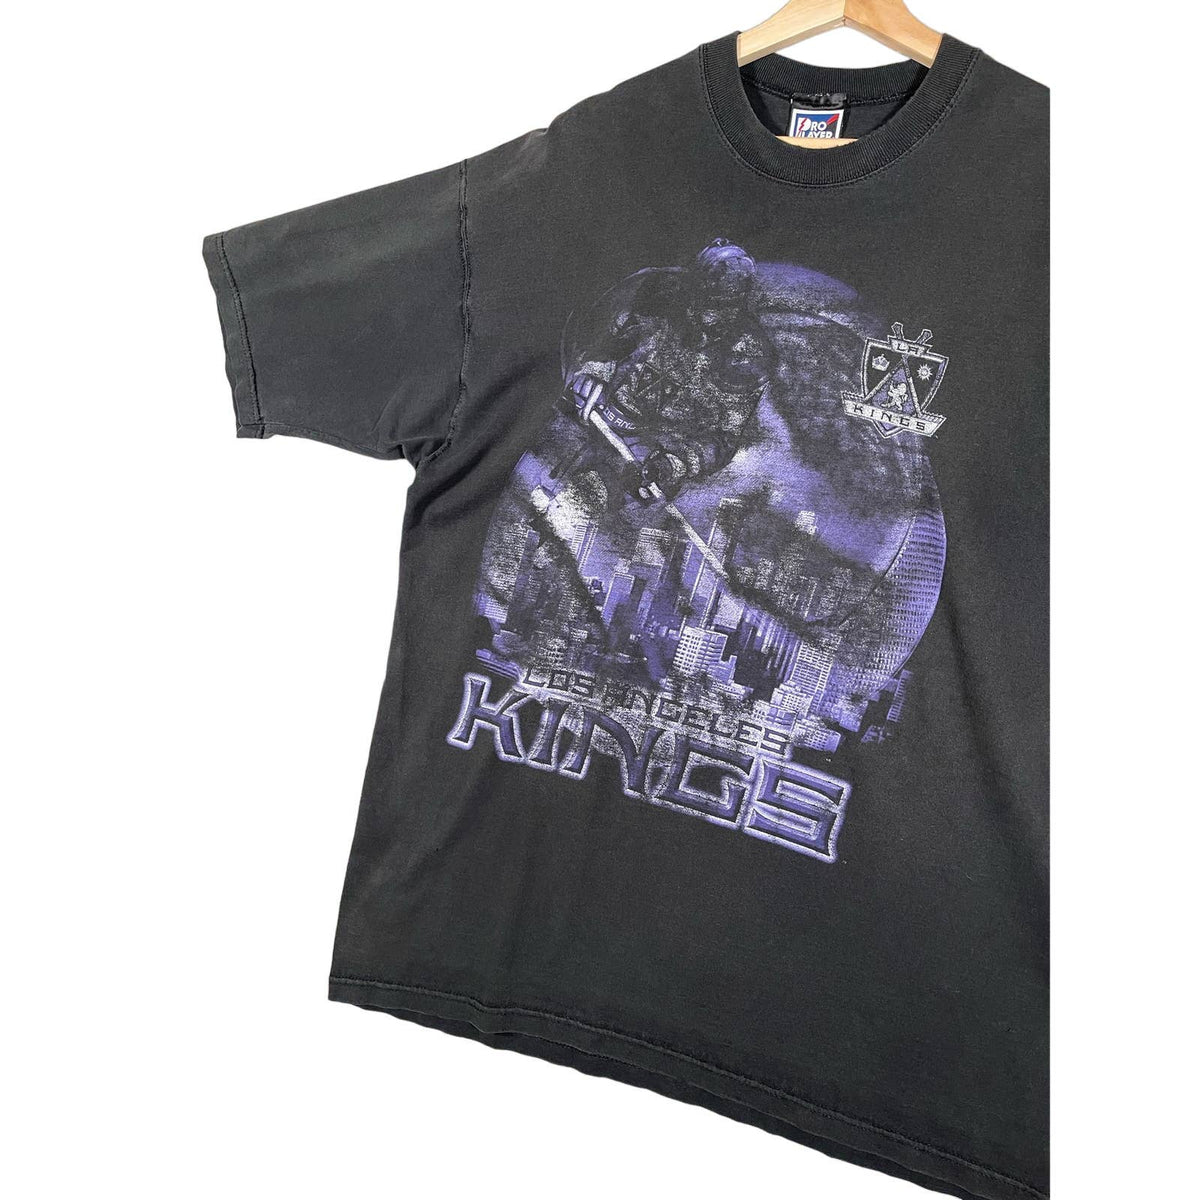 Vintage 1990's Los Angeles Kings Graphic T-Shirt